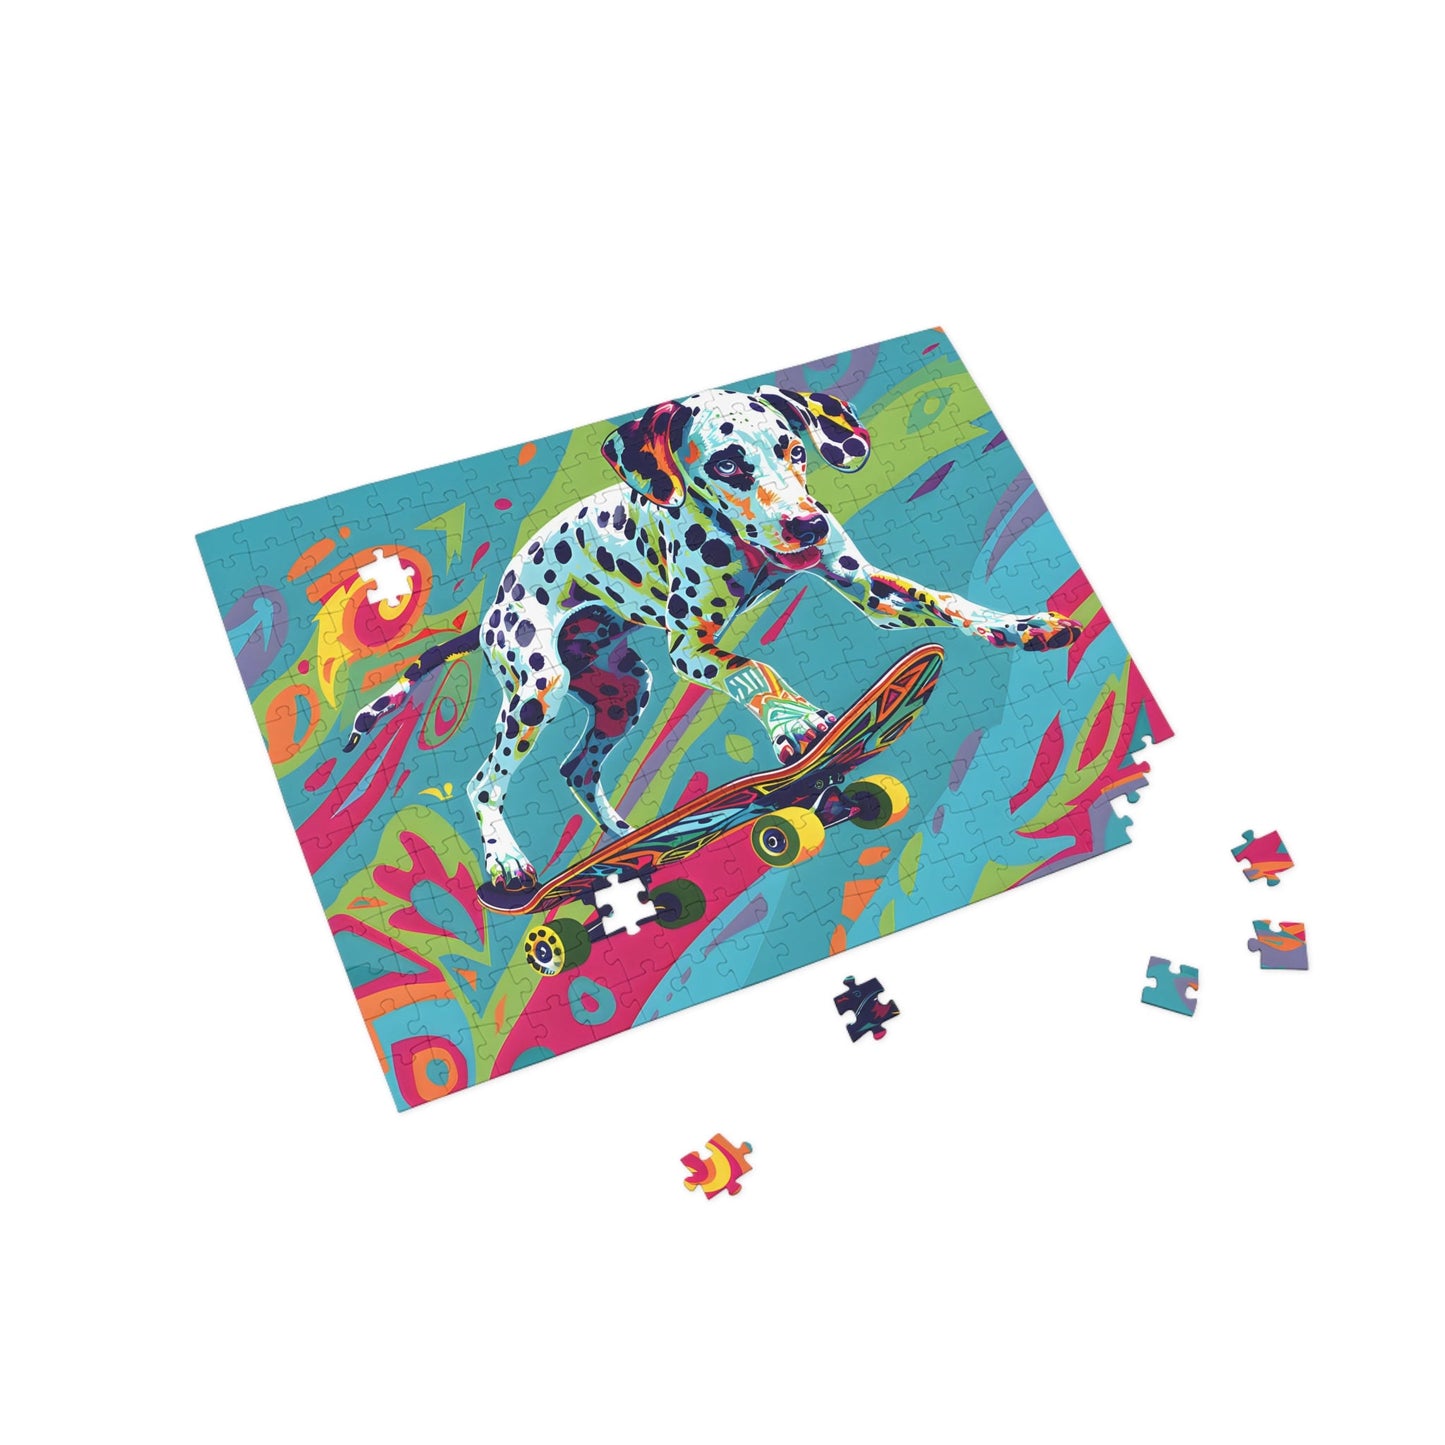 Colorful Canine Skater Jigsaw Puzzle - Puzzle - Peatsy Puzzles